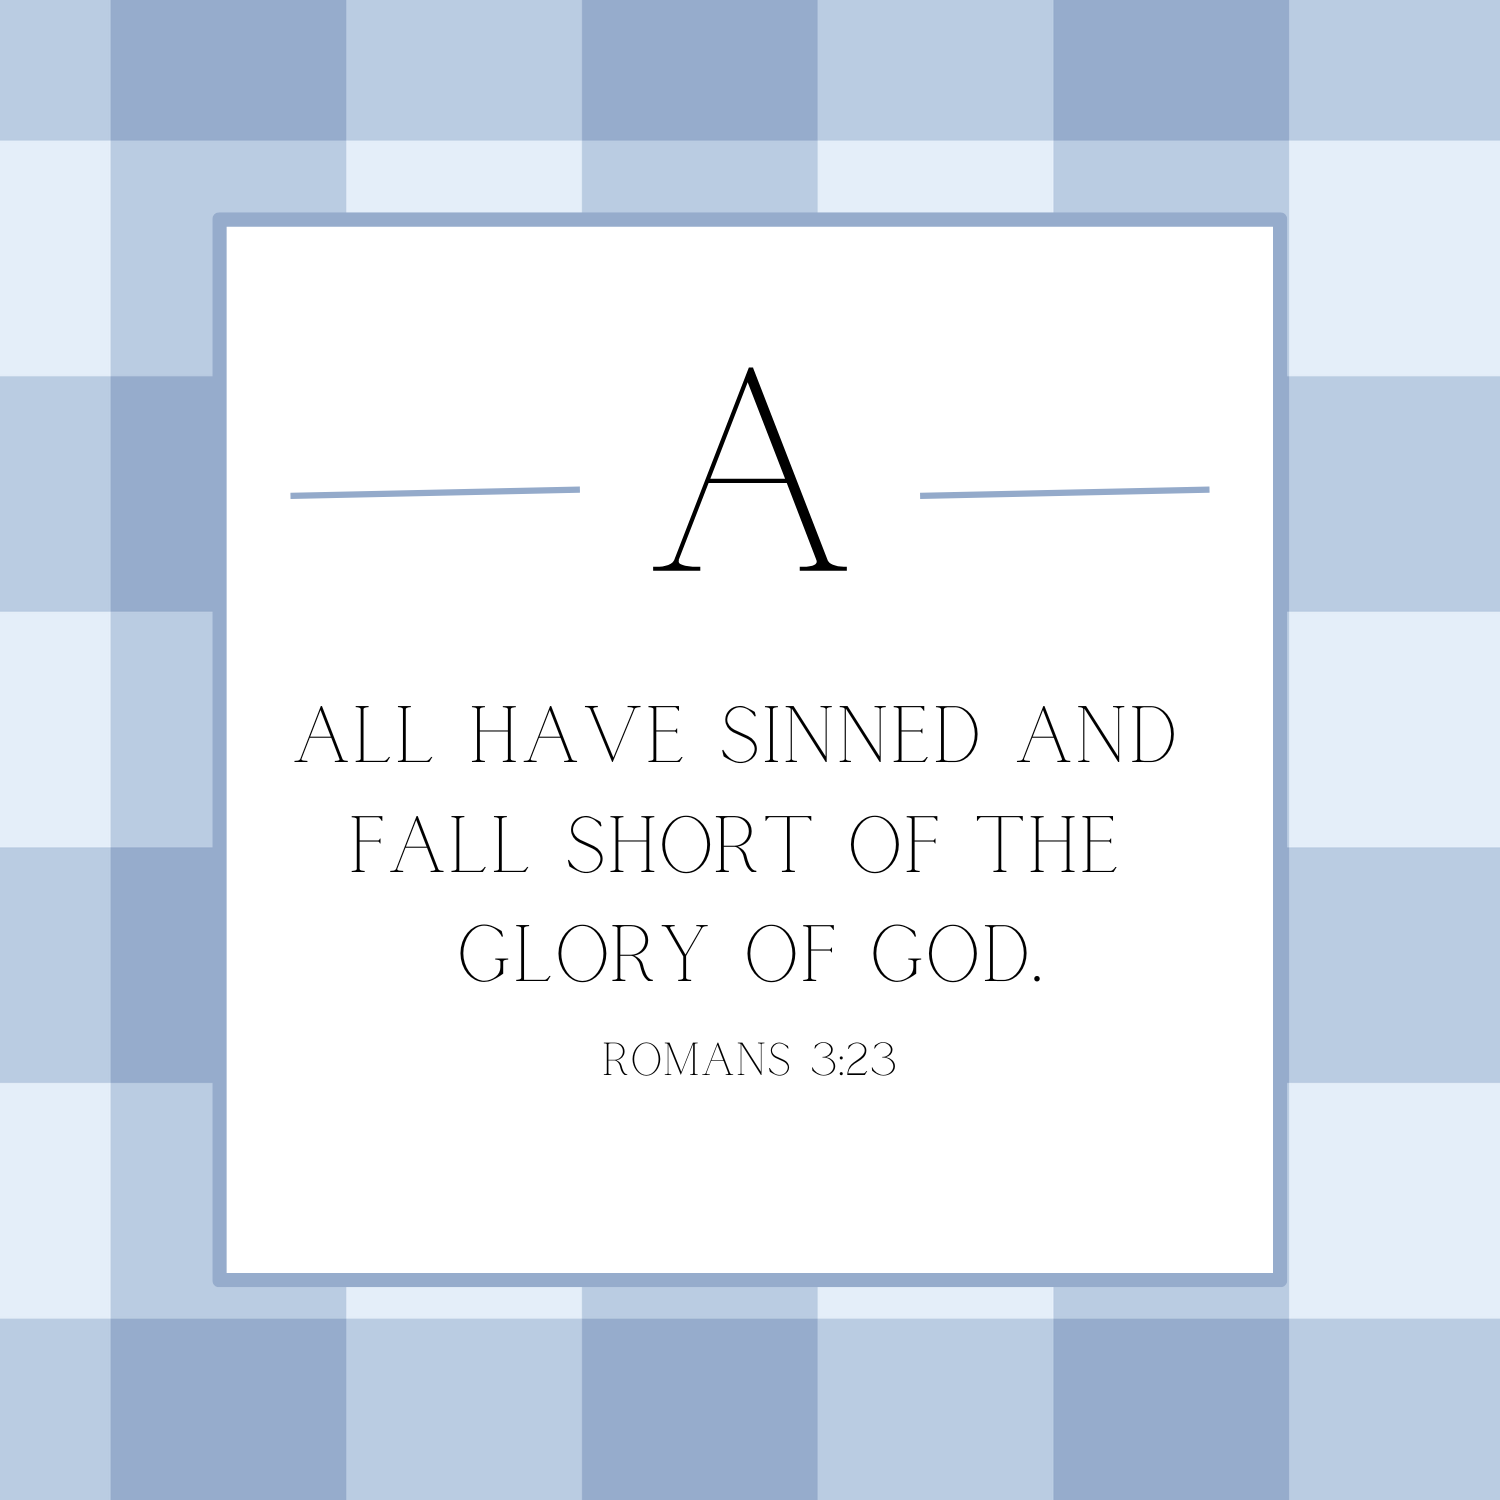 ABC Scripture Memory Cards - Romans 3:23 - All have sinned and fall short of the glory of God.